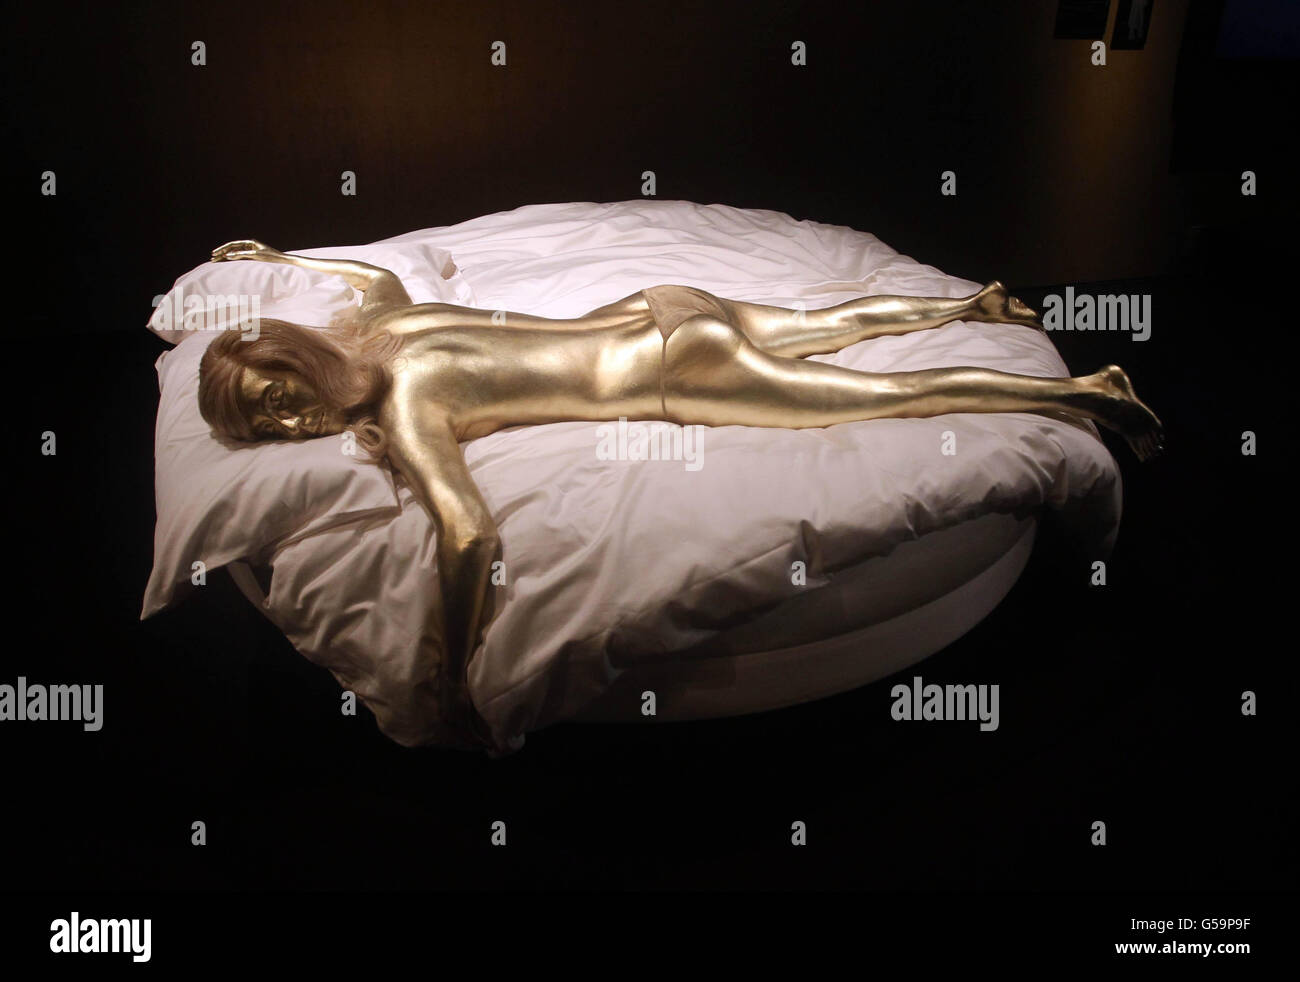 A model of Shirley Eaton as famous Bond girl Jill Masterson painted gold from the film Goldfinger (1964) at the Fifty Years of Bond Style press view at the Barbican, London. Stock Photo